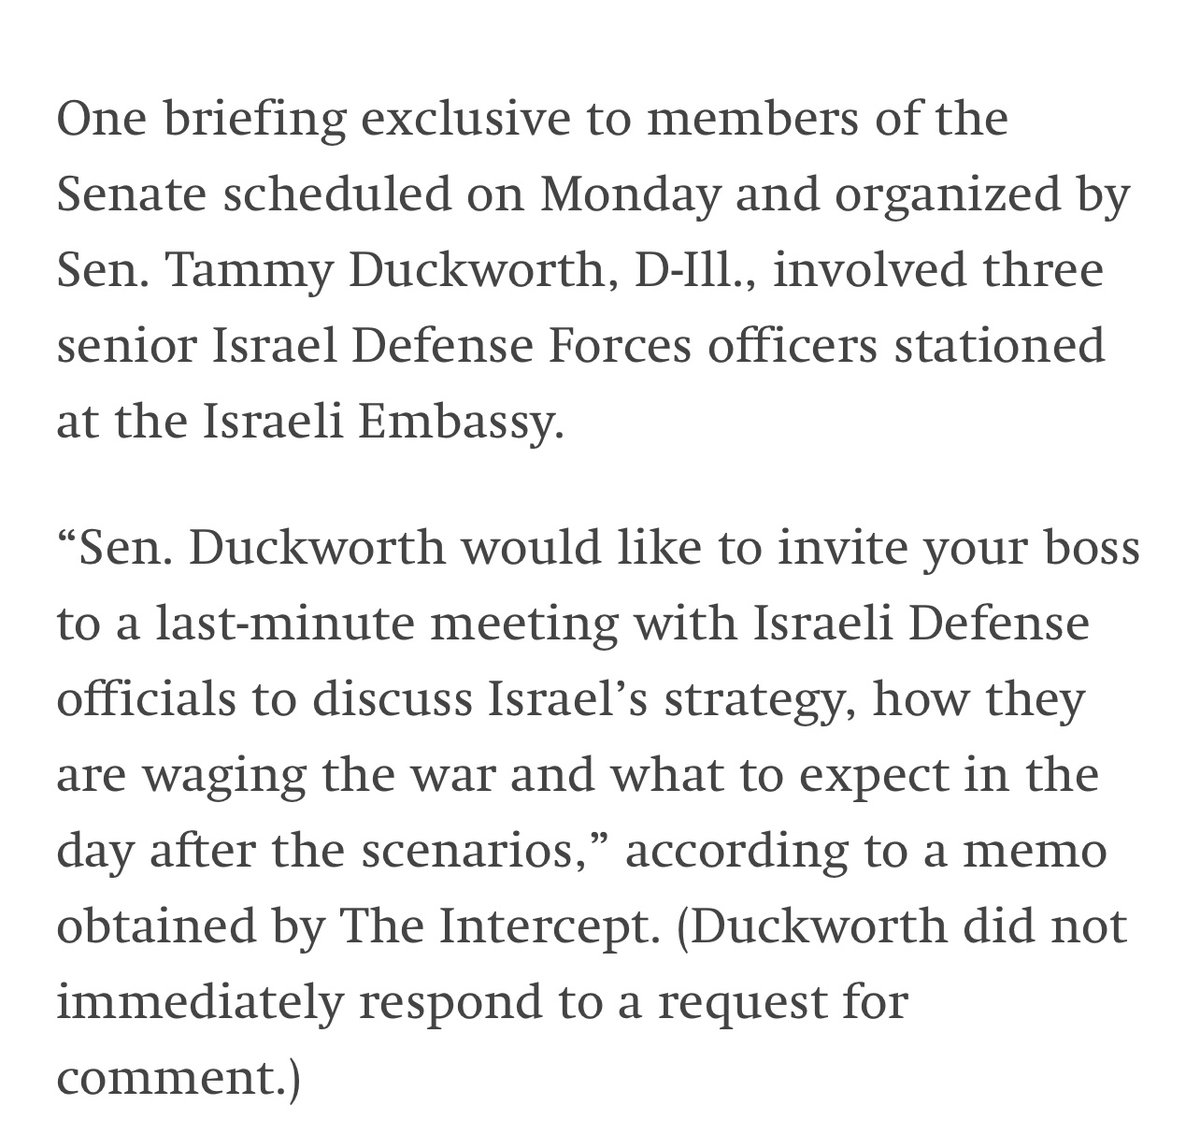 Chicago: If you want to know why @TammyDuckworth has been refusing calls calling for a Ceasefire, it’s because she’s actively aiding the IDF and enabling genocide.